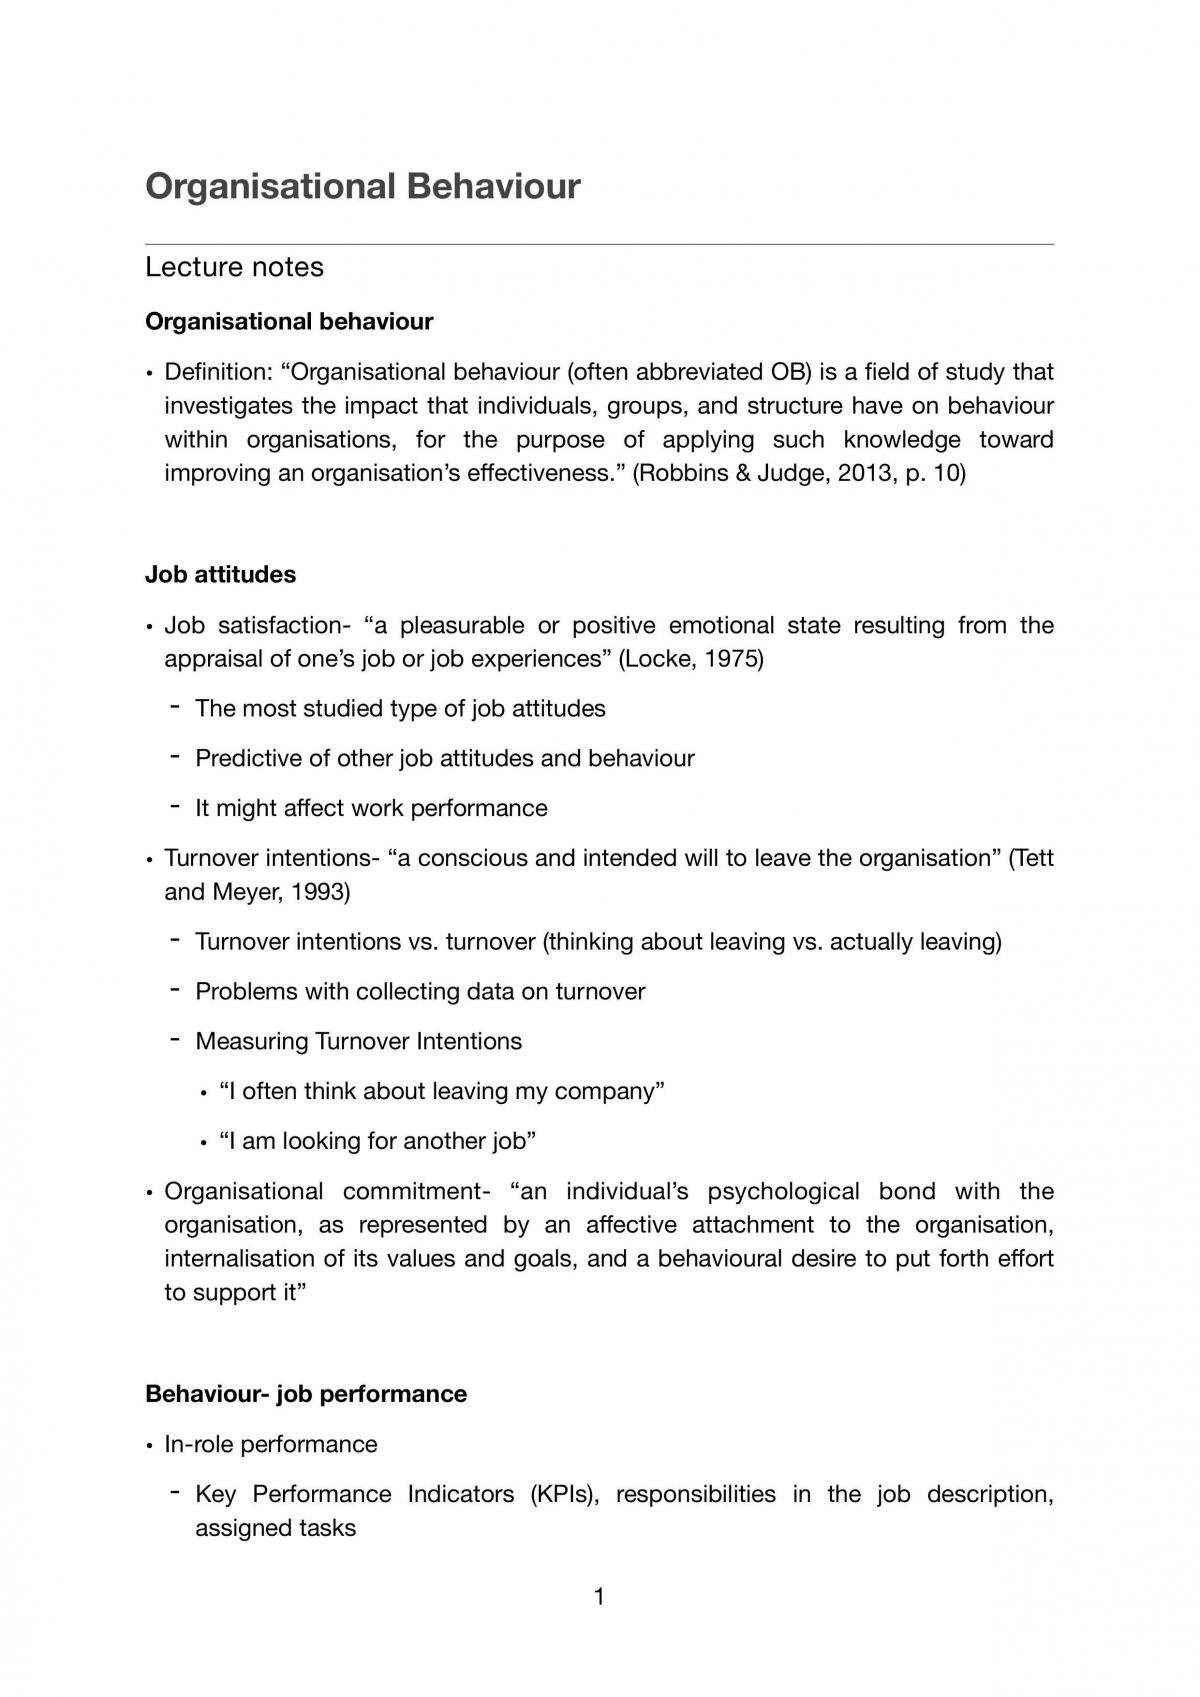 Organisational Behaviour complete notes - Page 1